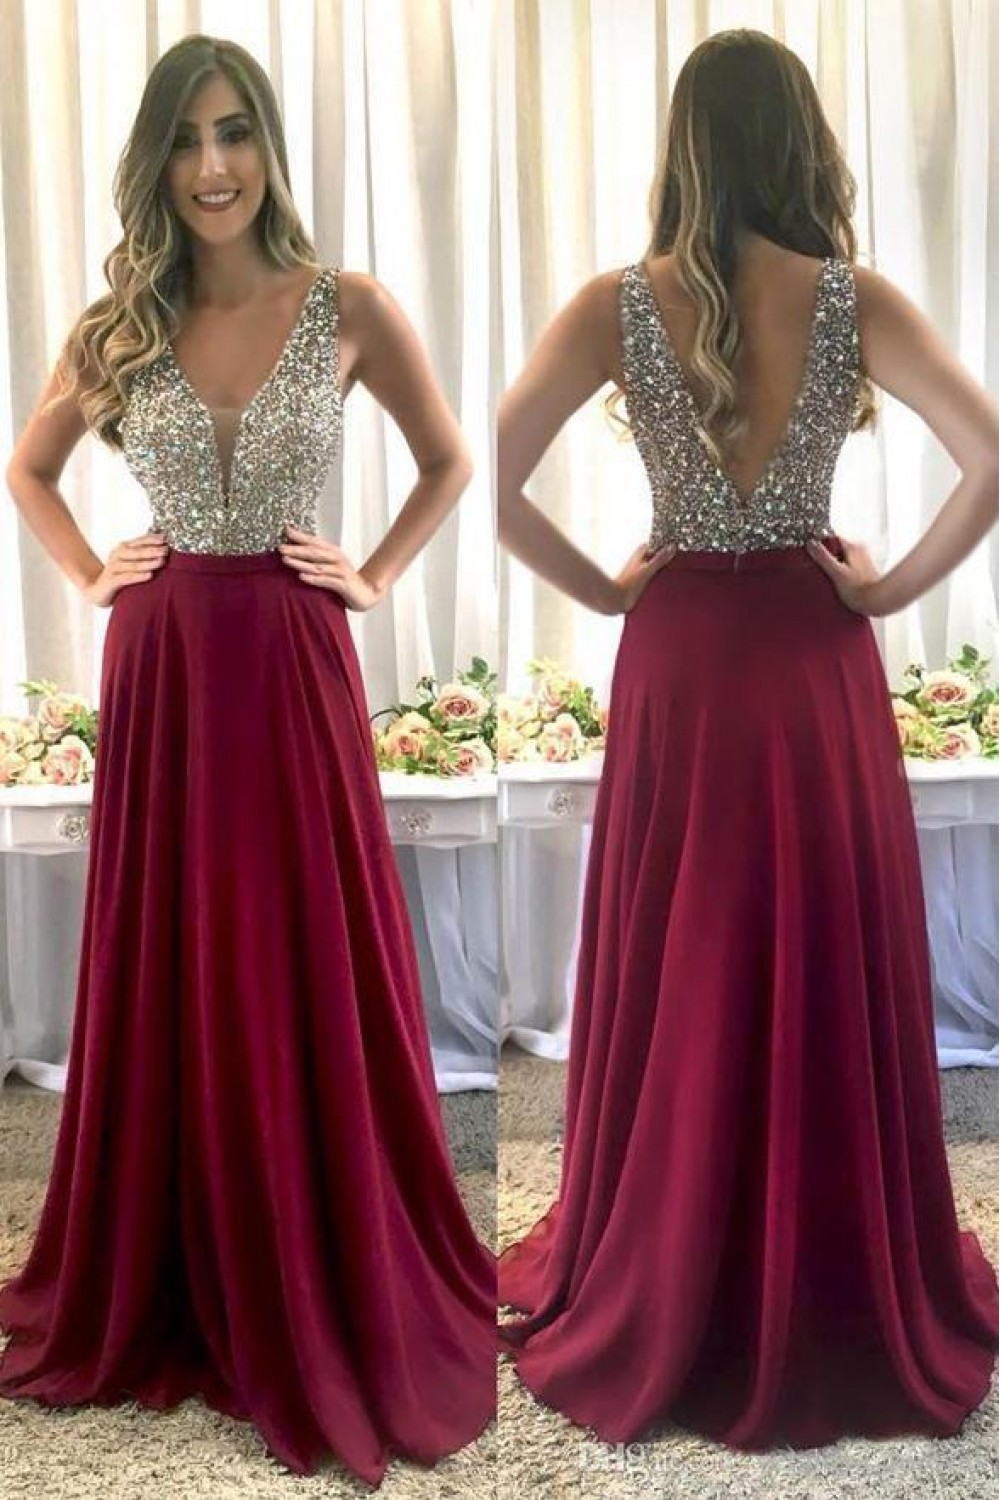 Lovely Deep V Neck Nude Beaded Bodice Wine Red Floor Length Skirt Evening Prom Dress - Click Image to Close